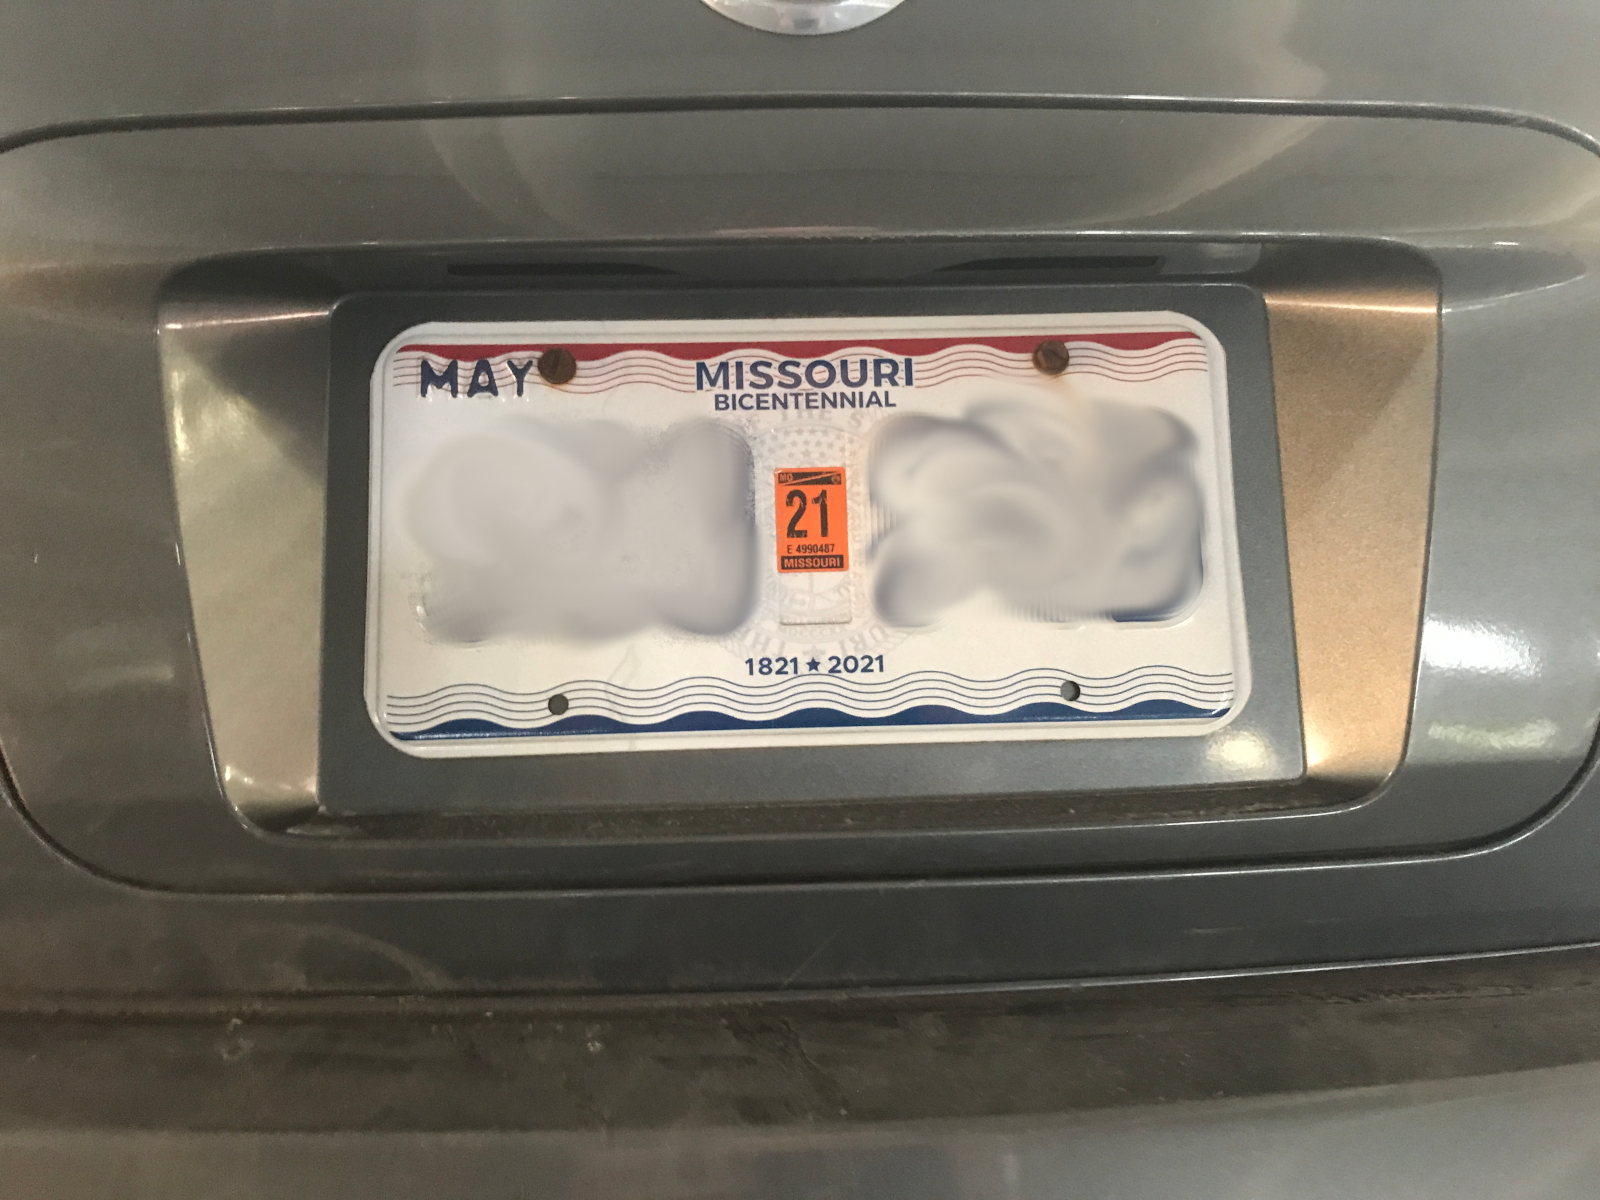 An expired license plate